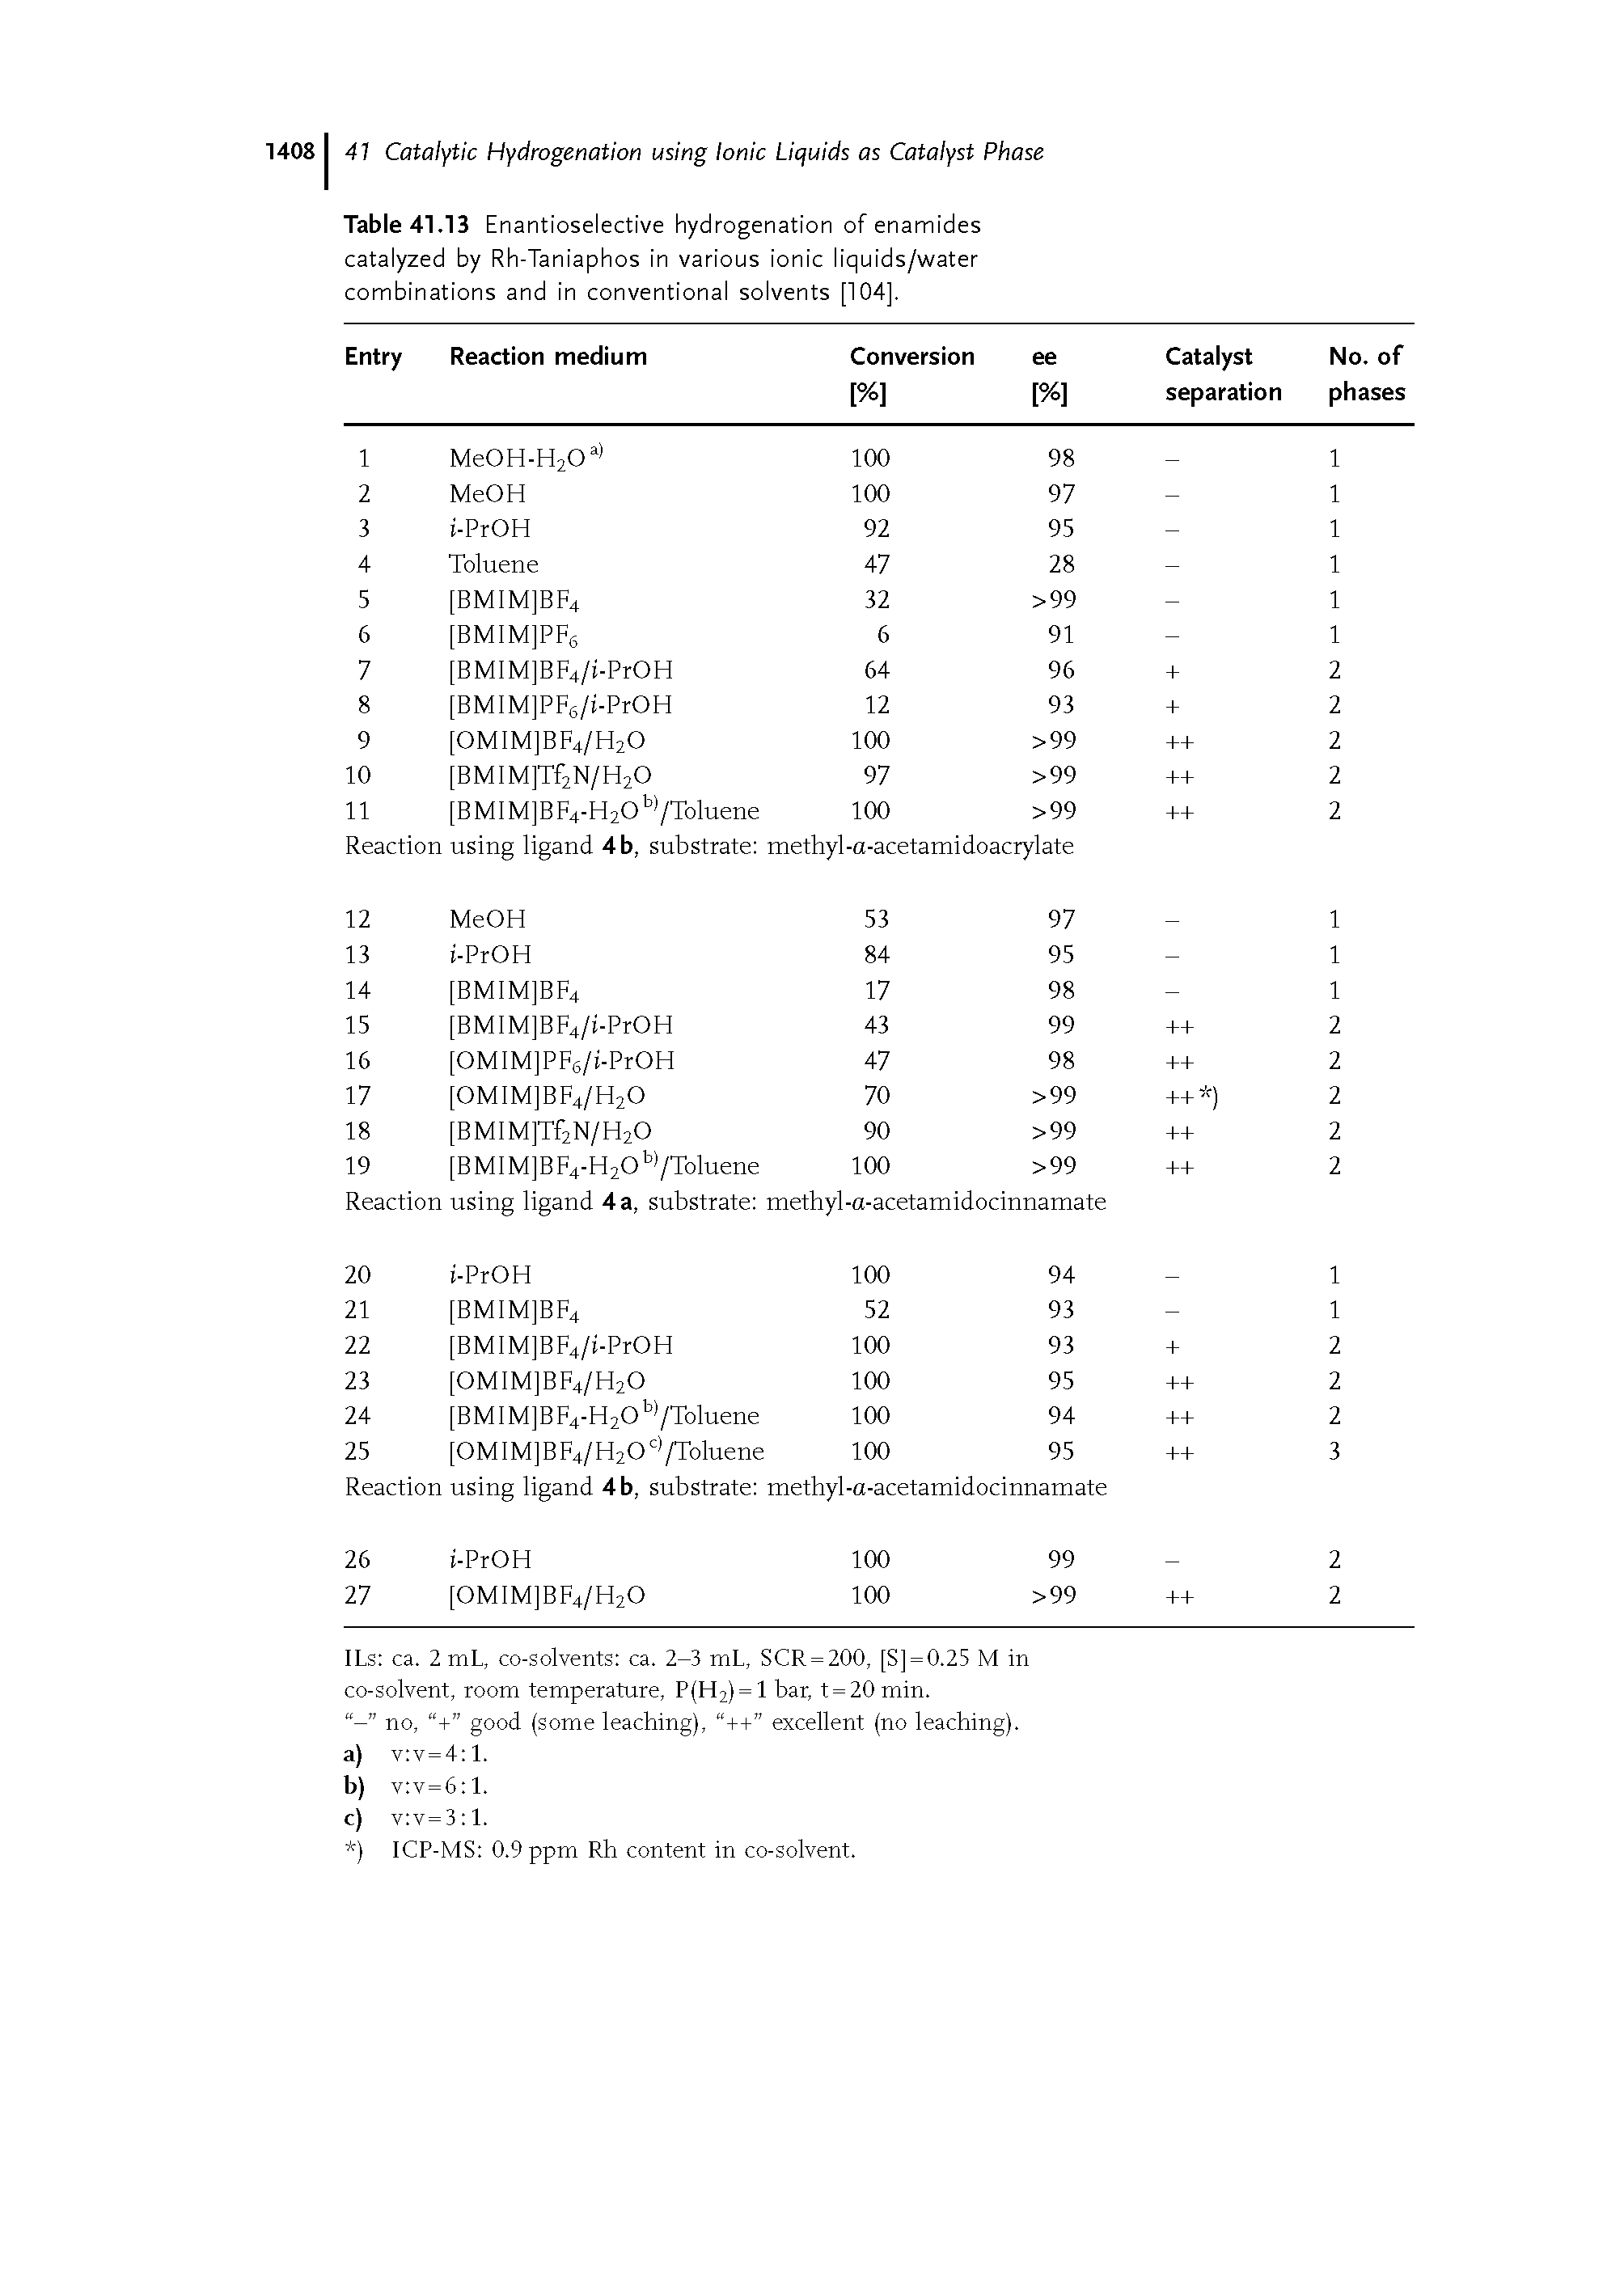 Table 41.13 Enantioselective hydrogenation of enamides catalyzed by Rh-Taniaphos in various ionic liquids/water combinations and in conventional solvents [104].